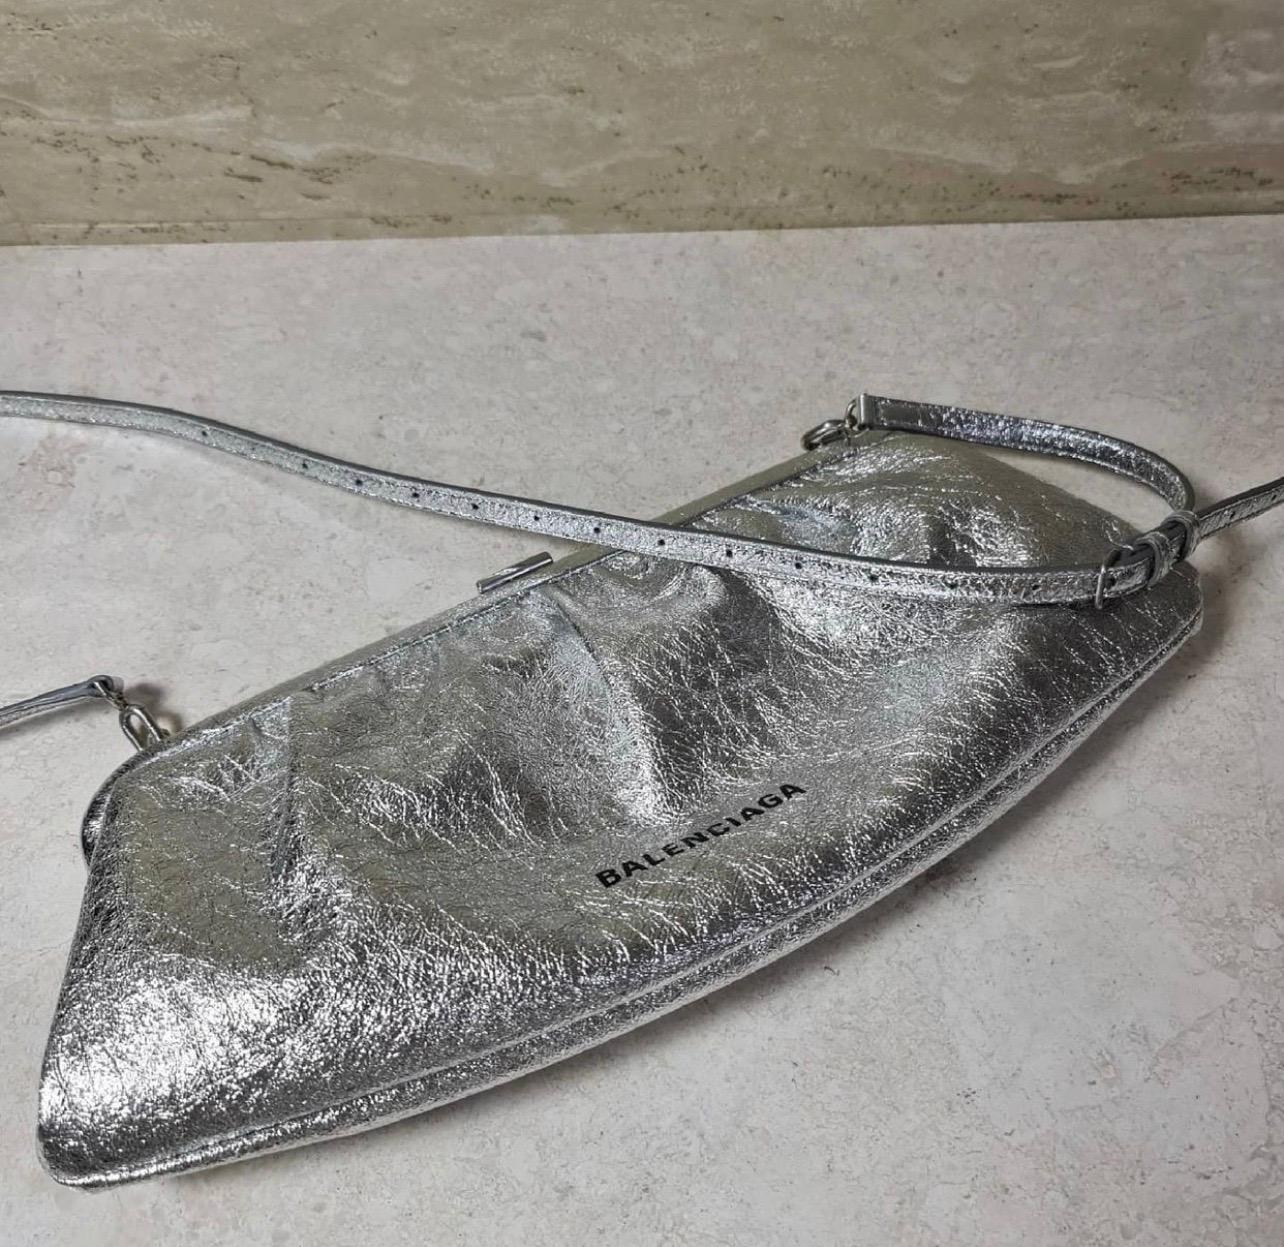 Tap into Balenciaga's confident style with this silver iteration of the Cloud bag, named after the elongated and gathered shape. It's made in Italy from crackled leather with a structured frame nodding to vintage purses and lined in black organic